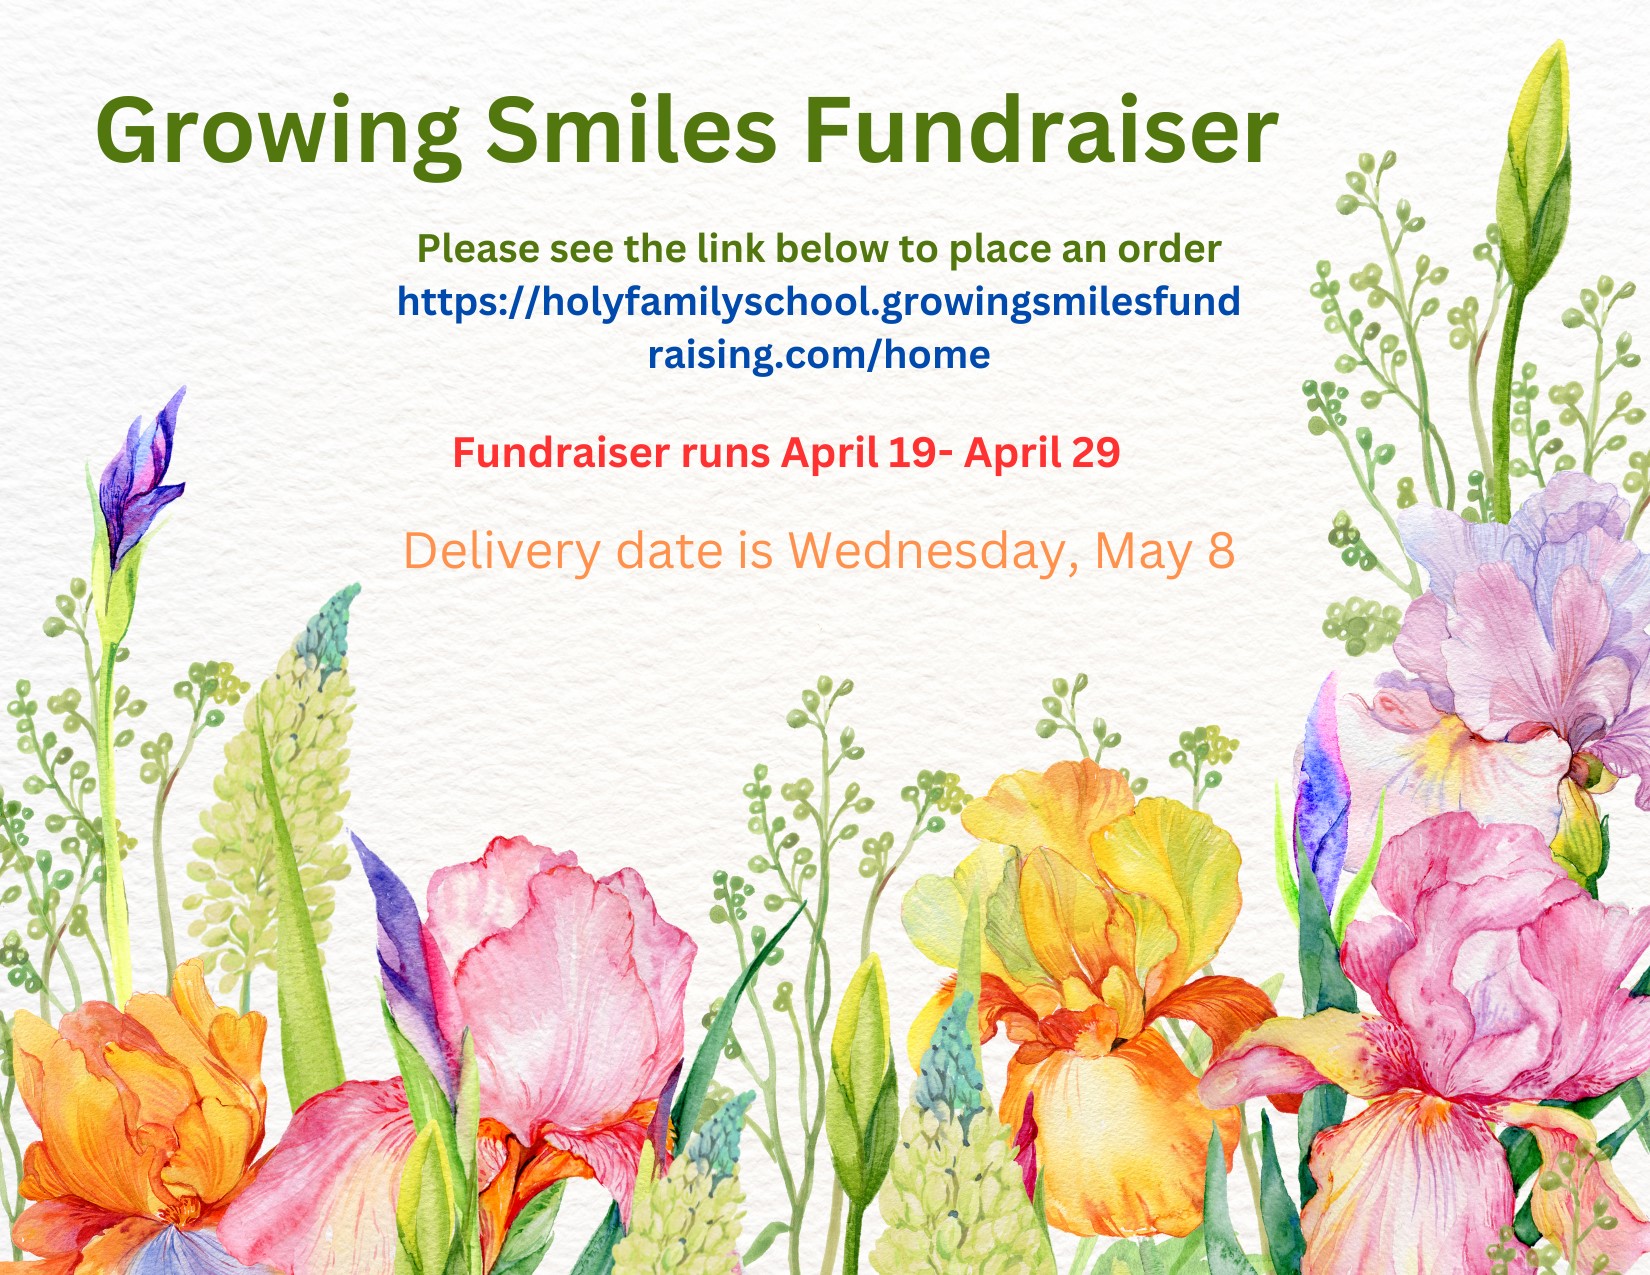 Growing Smiles Fundraiser